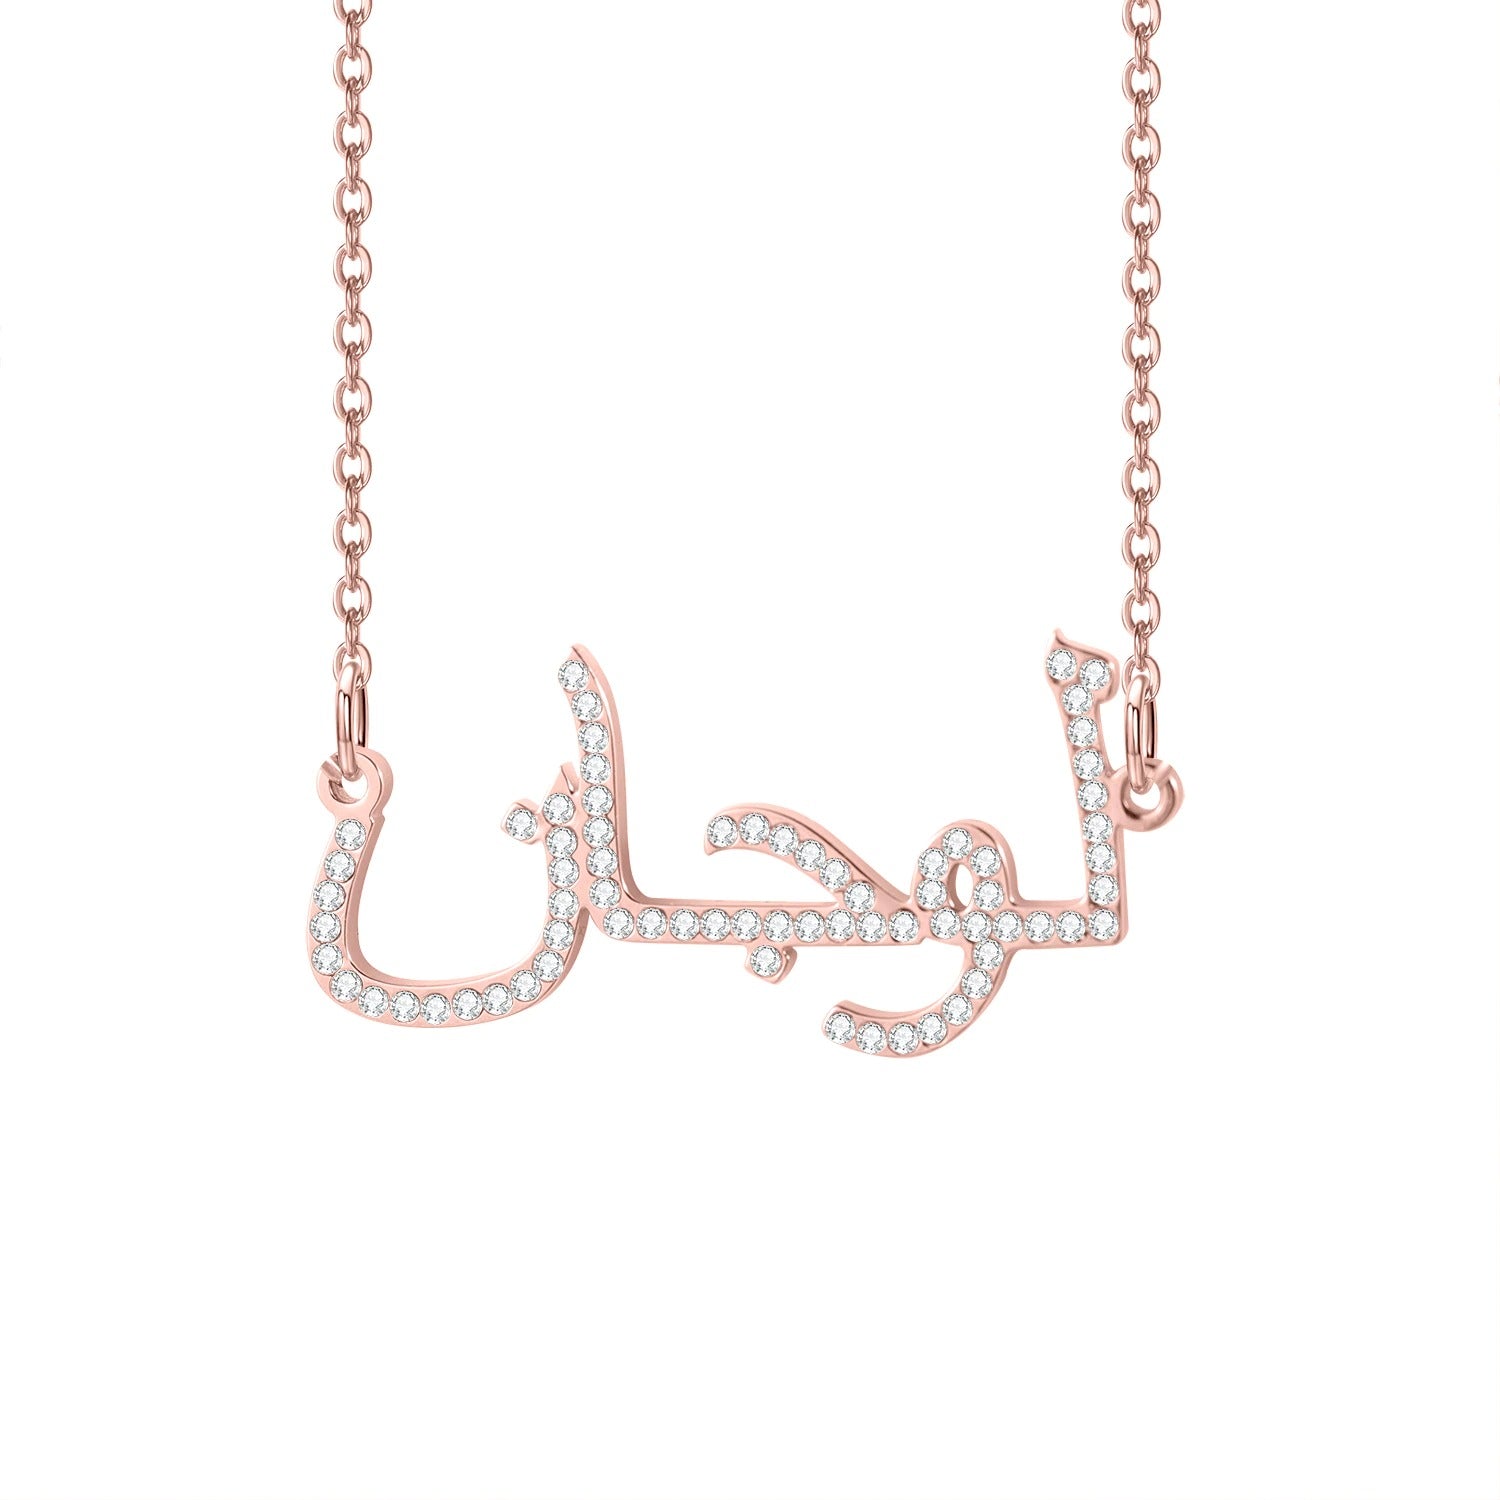 Arabic Name Necklace with Crystals rose gold